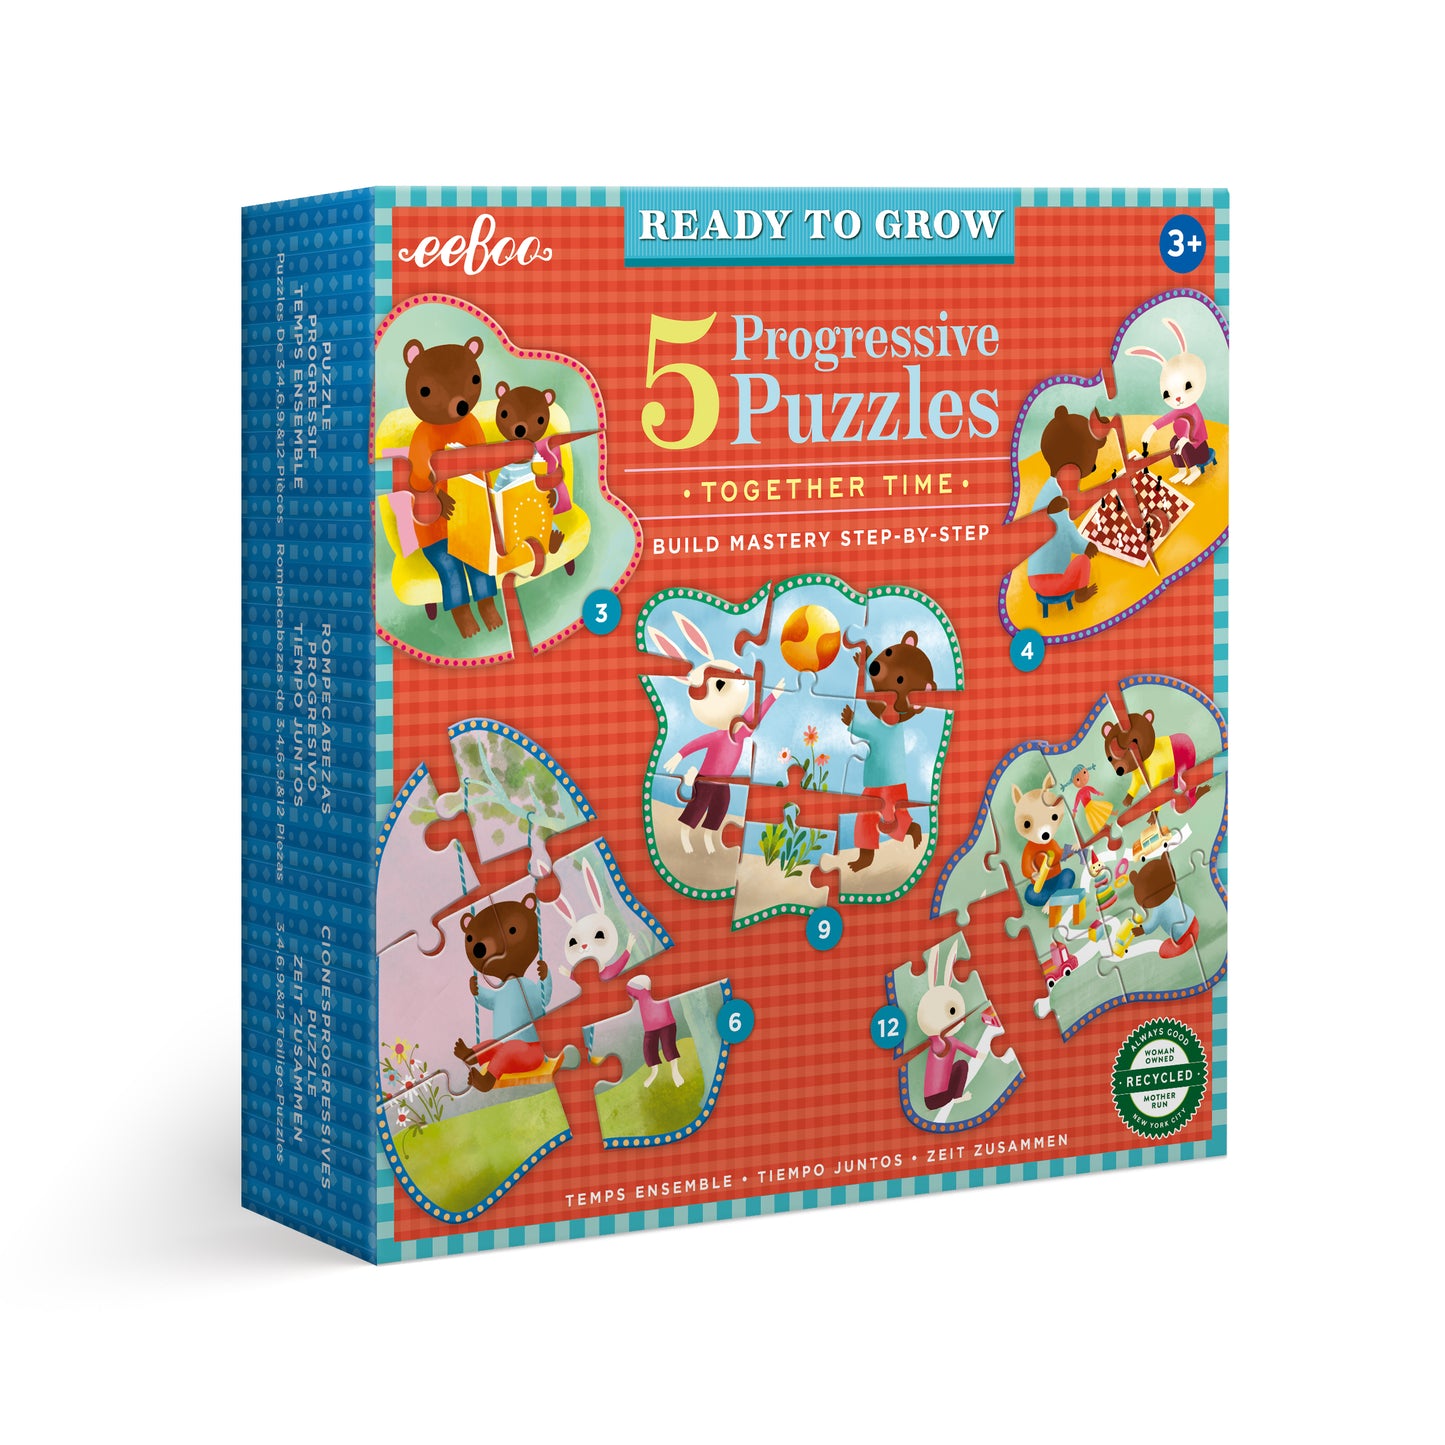 Ready to Grow - Together Time - Includes Five Progressive Puzzles | eeBoo Wonderful Gift for Kids 3+